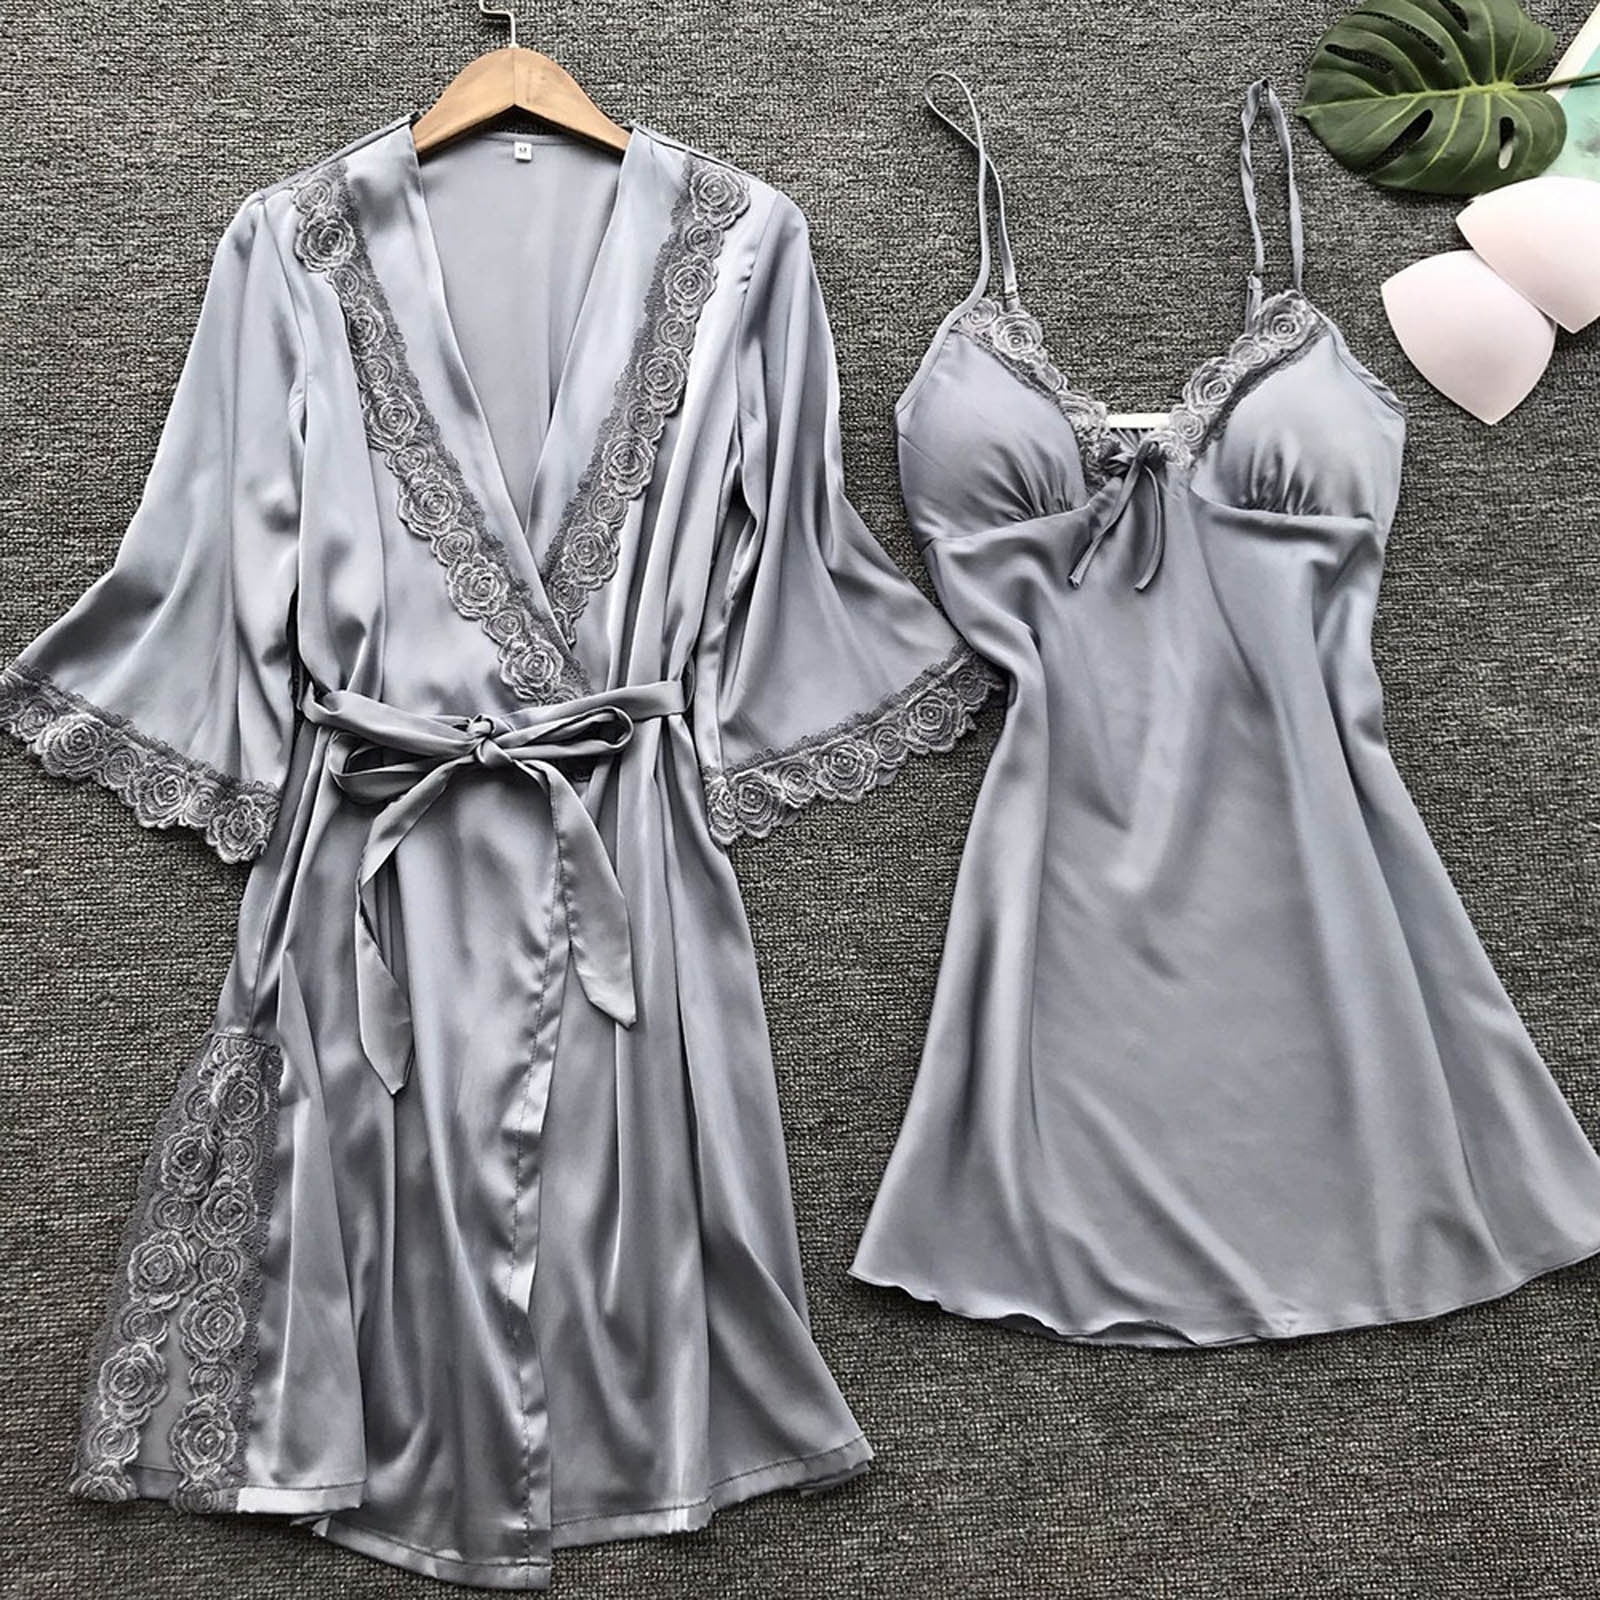 Yuwull Woman Sleepwear Sleep Wear Ladies Fashion Comfortable Solid Color  Lace Suspenders Pajamas Dress Woman Nightgown Home Clothes Suit Women